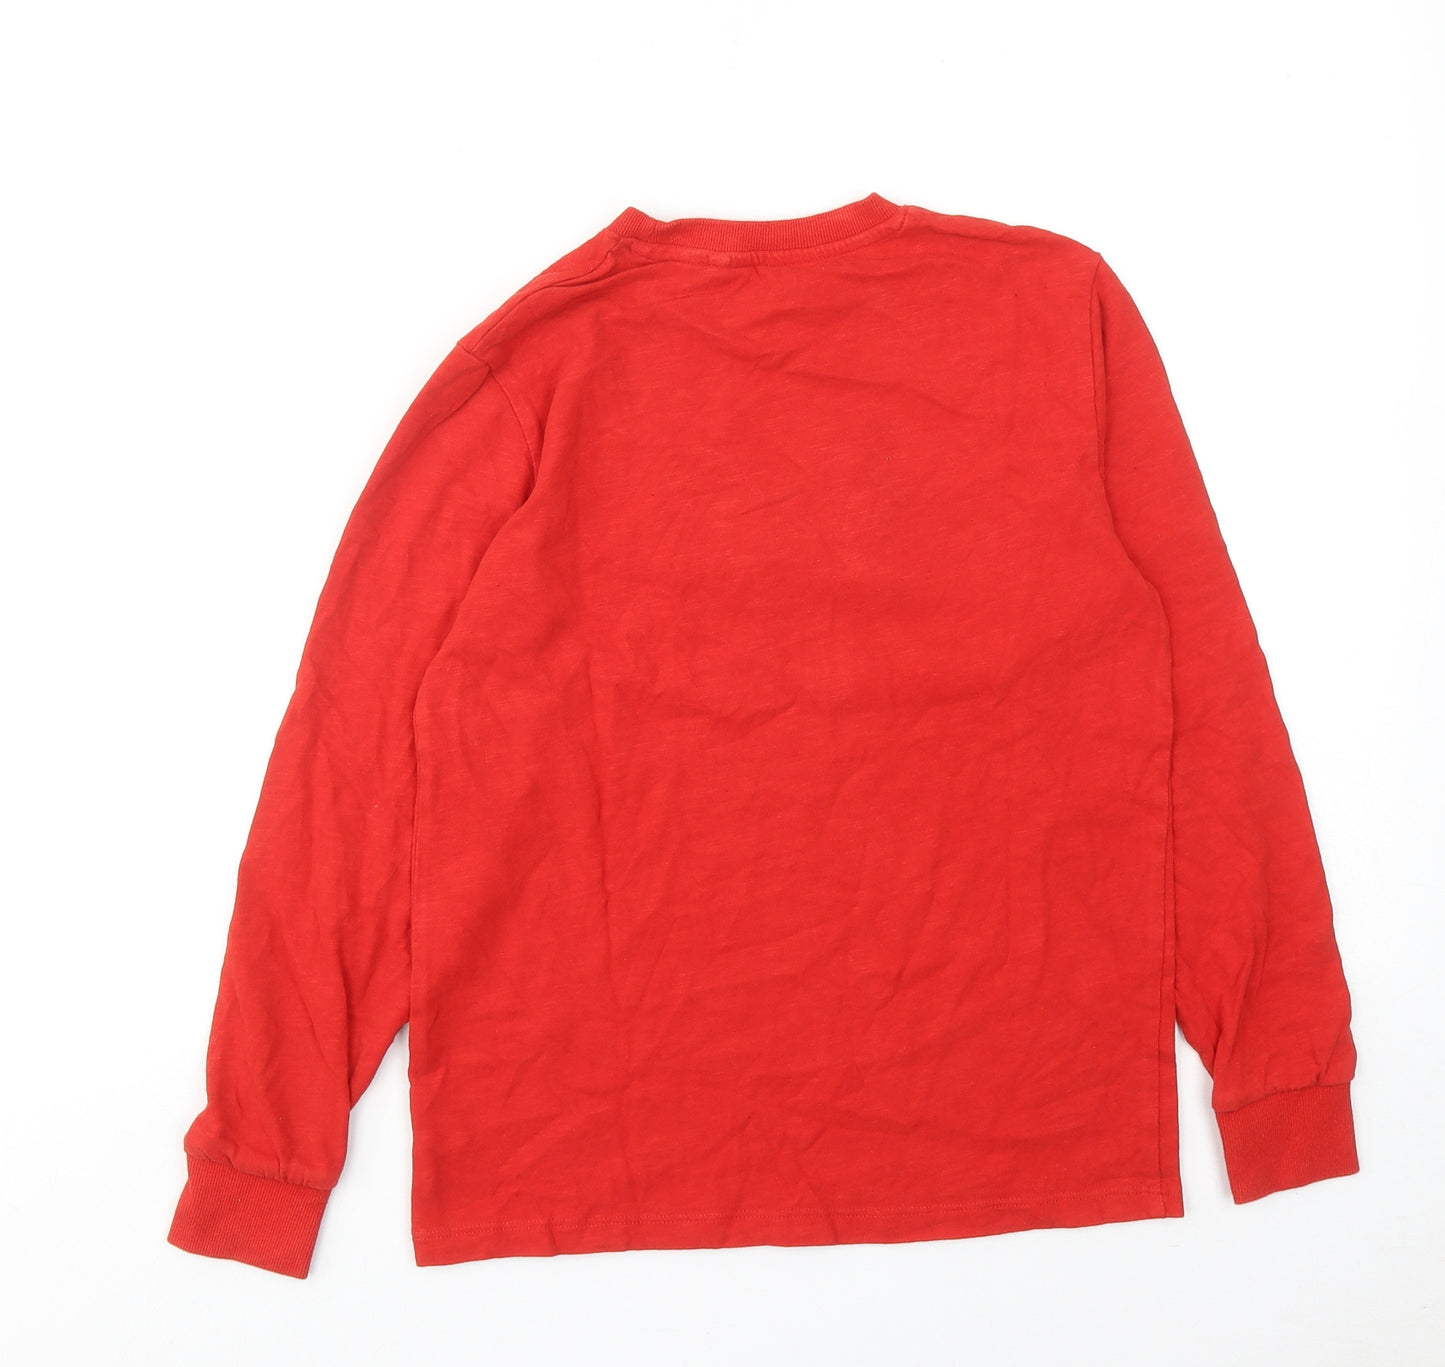 NEXT Boys Red Cotton Basic T-Shirt Size 11 Years Round Neck Pullover - Gingerbread Man Christmas